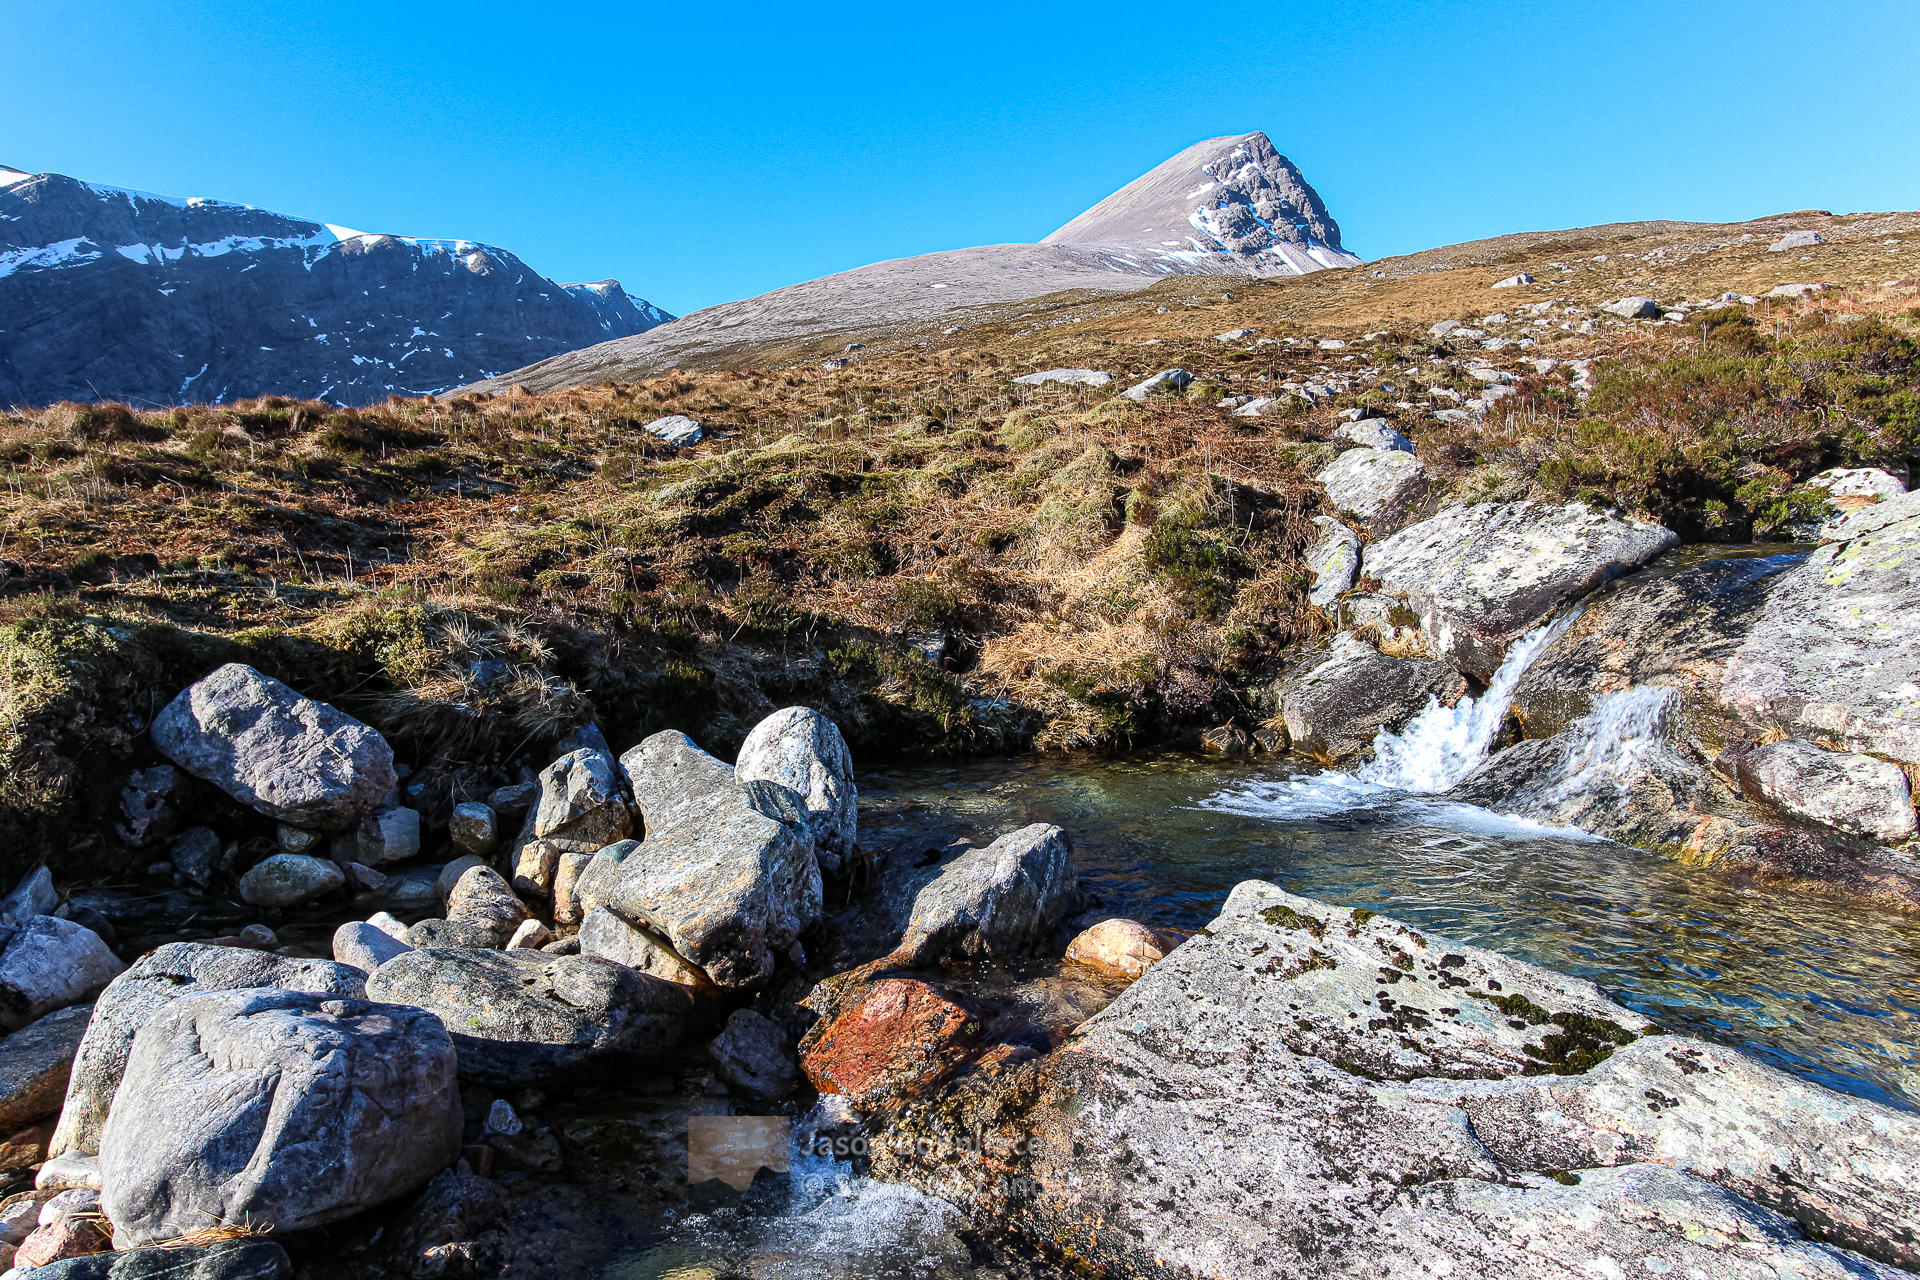 A' Cheir Ghorm from the Allt a' Mhadaidh stream to the east above Strath Dionard, Northern Sutherland